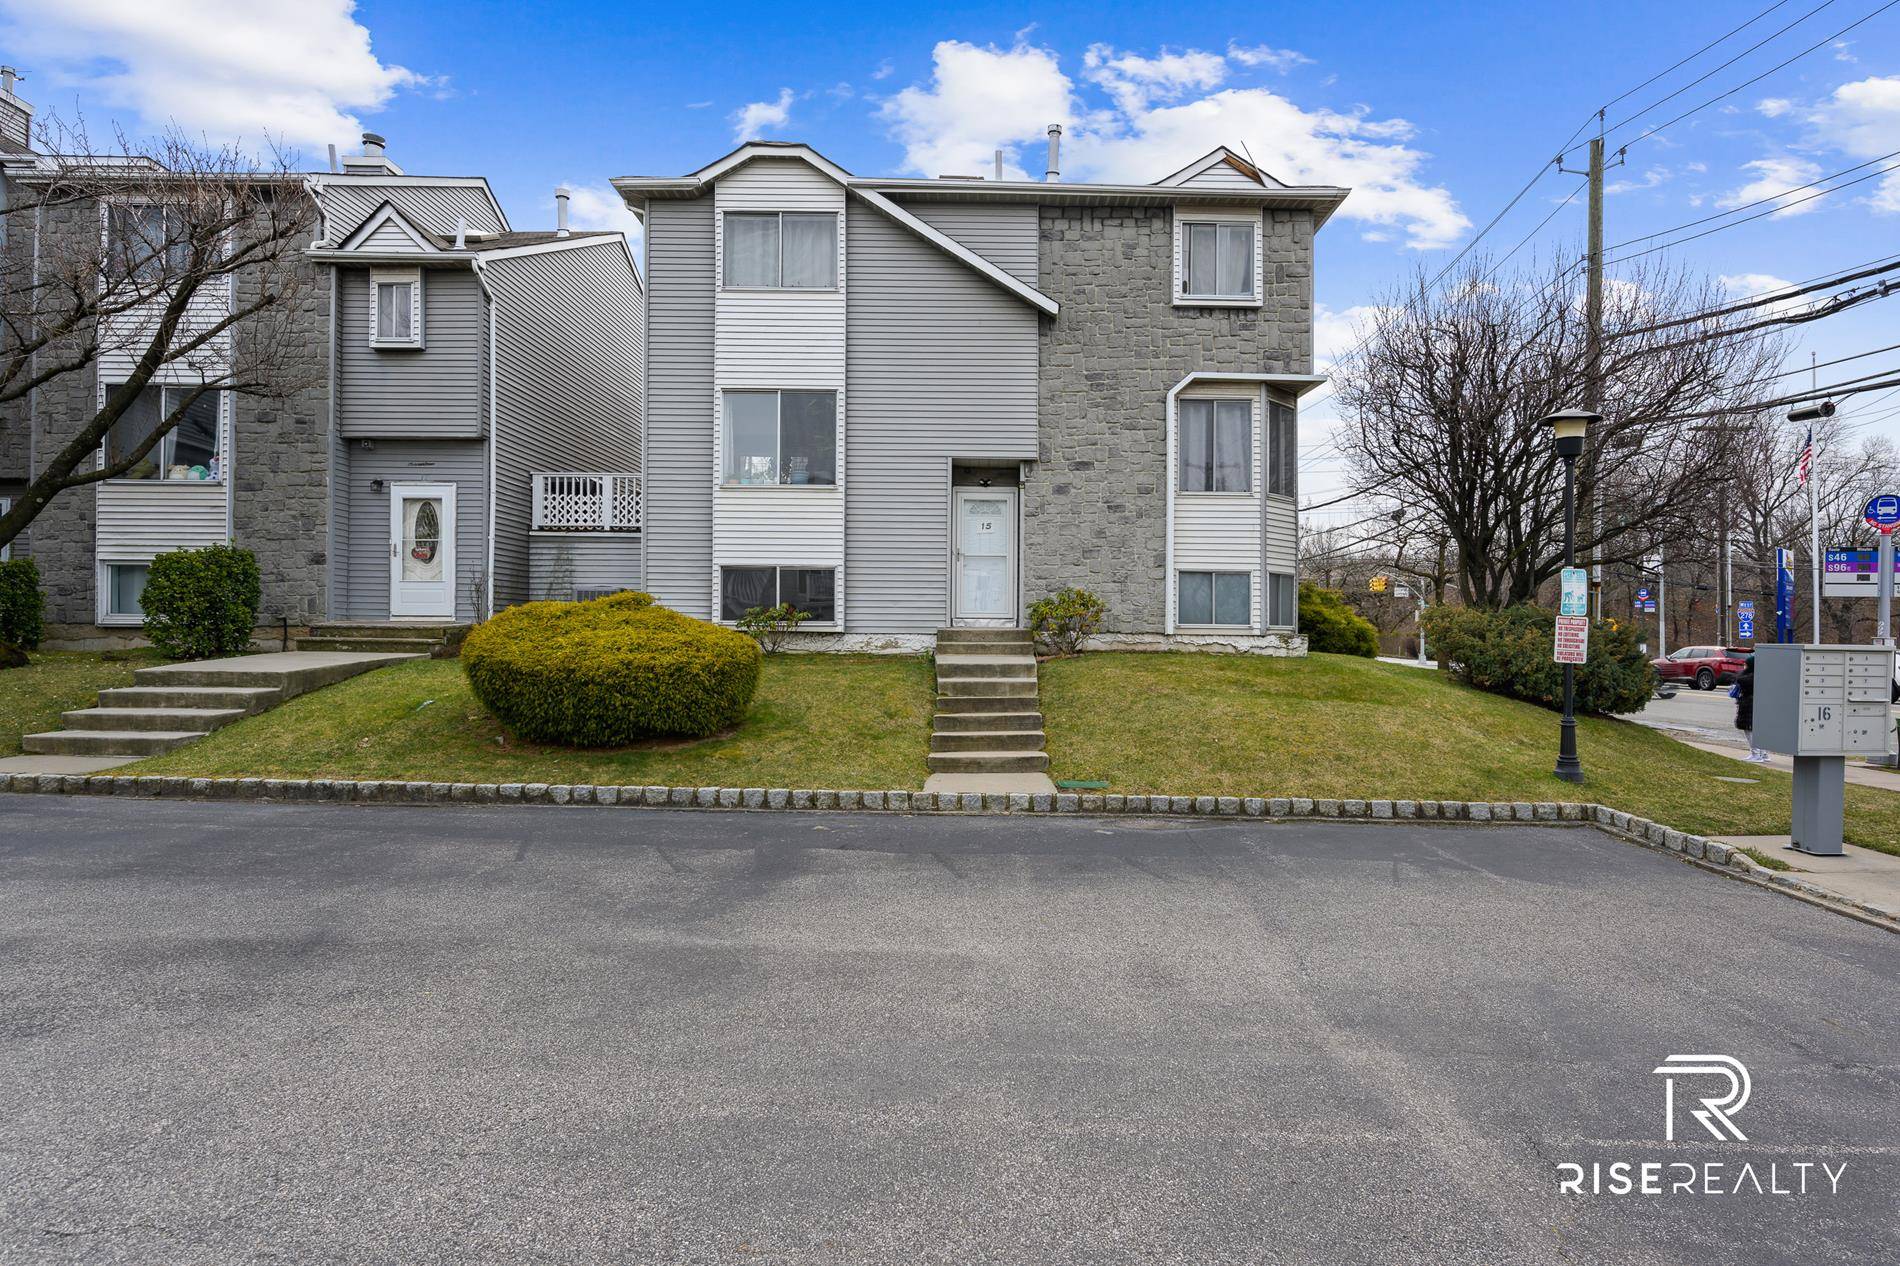 Welcome to 15 Regal Walk, a stunning townhouse style condo in the heart of Staten Island, NY.